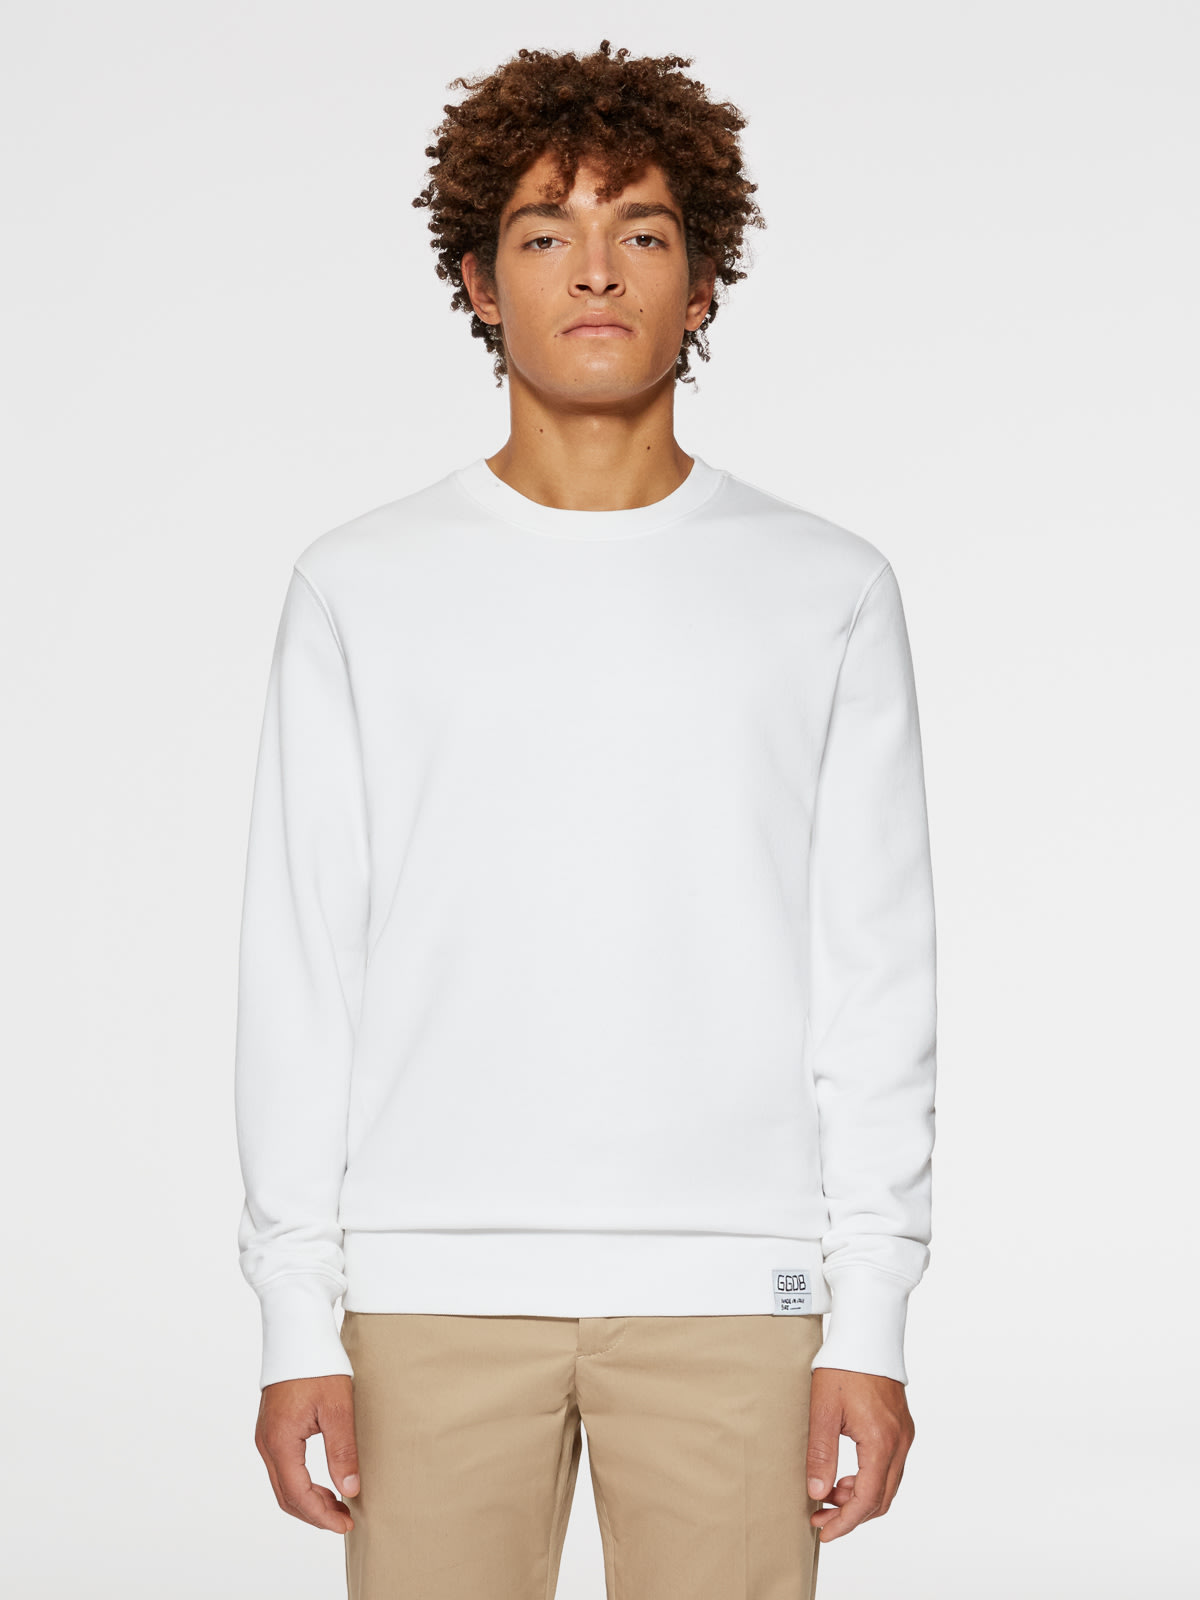 White Archibald sweatshirt with contrasting lettering on the back